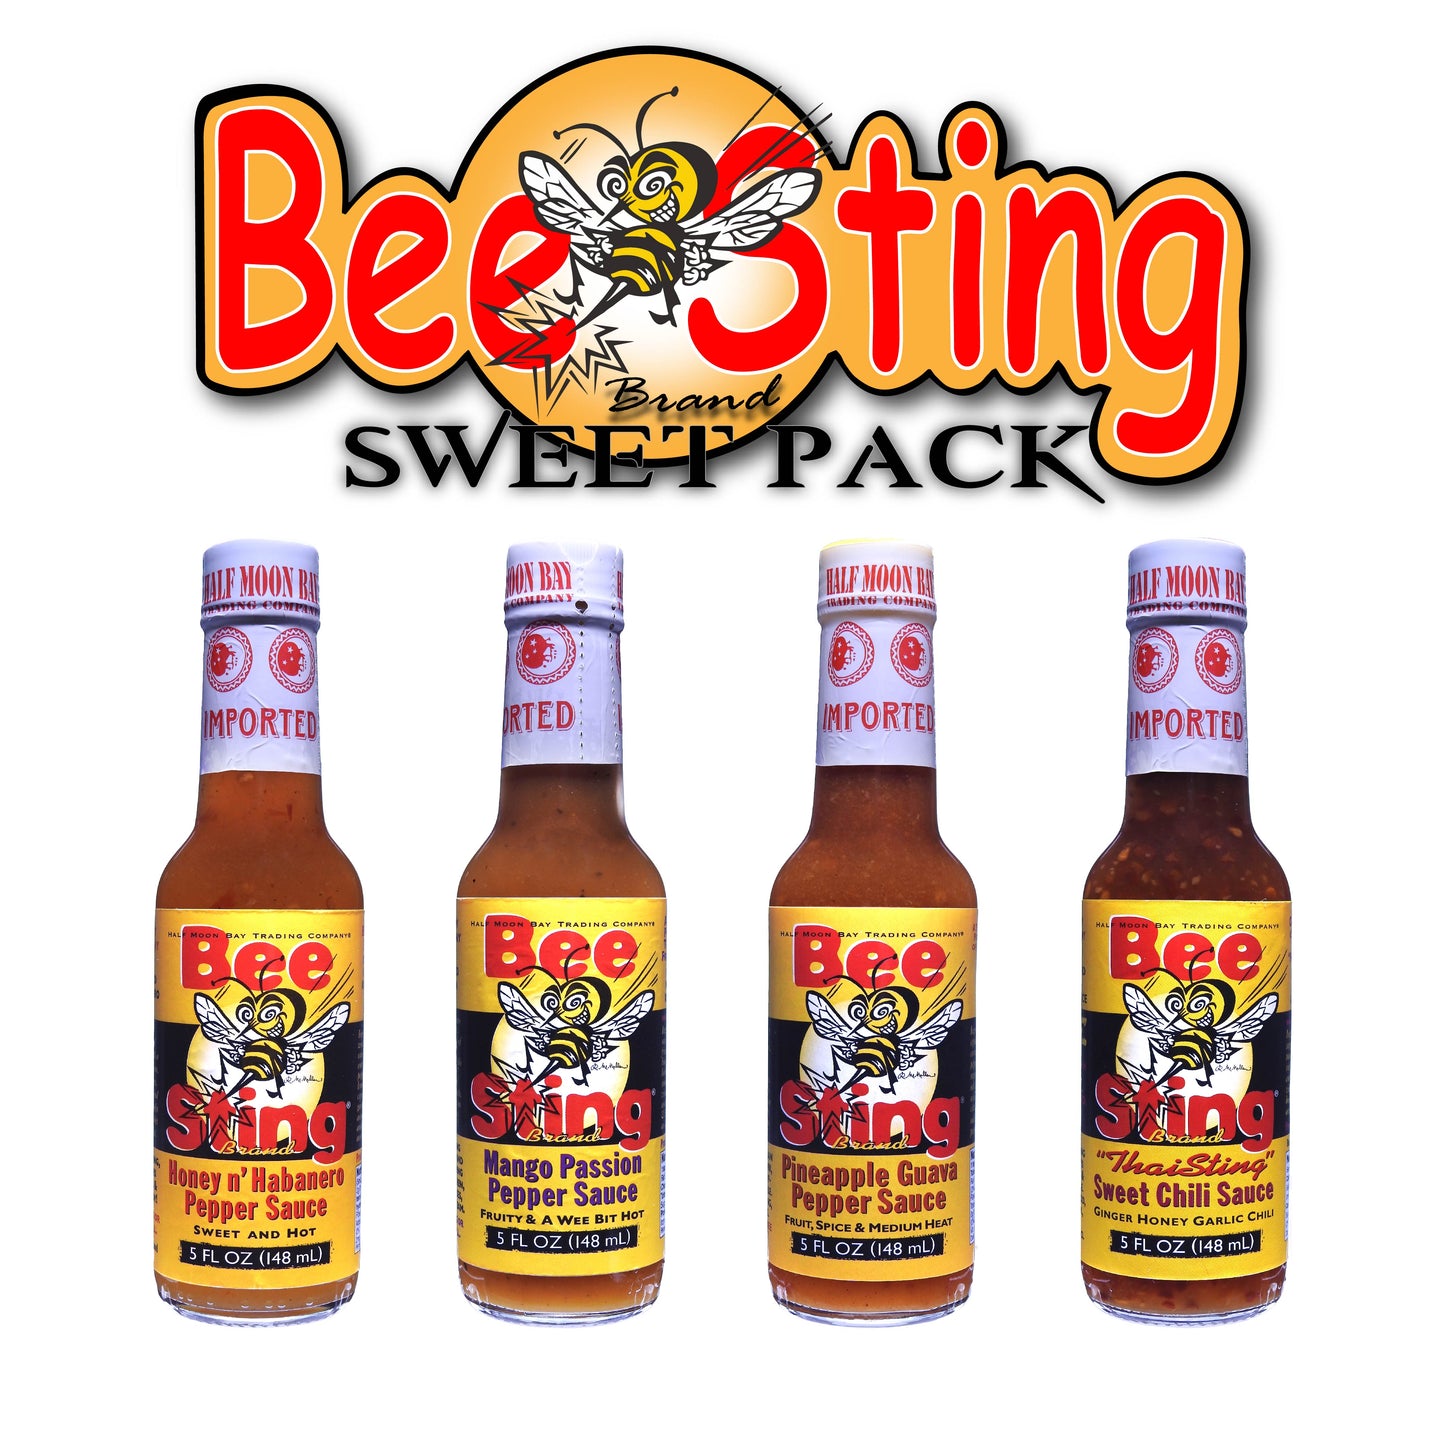 XCOL-006: BeeSting Sweet Pack